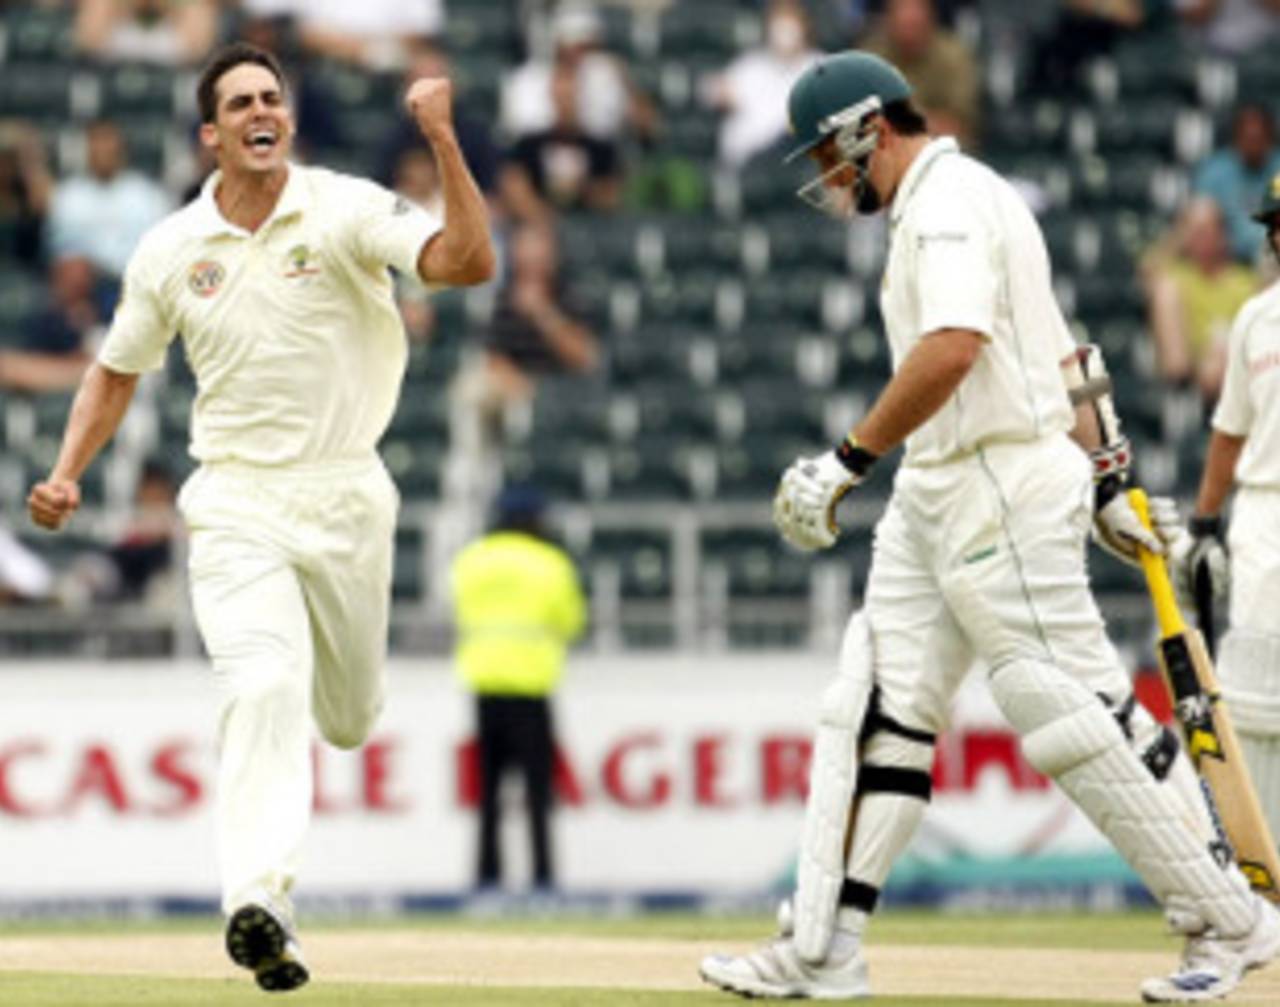 Mitchell Johnson struck in the first over, South Africa v Australia, 1st Test, Johannesburg, 2nd day, February 27, 2009